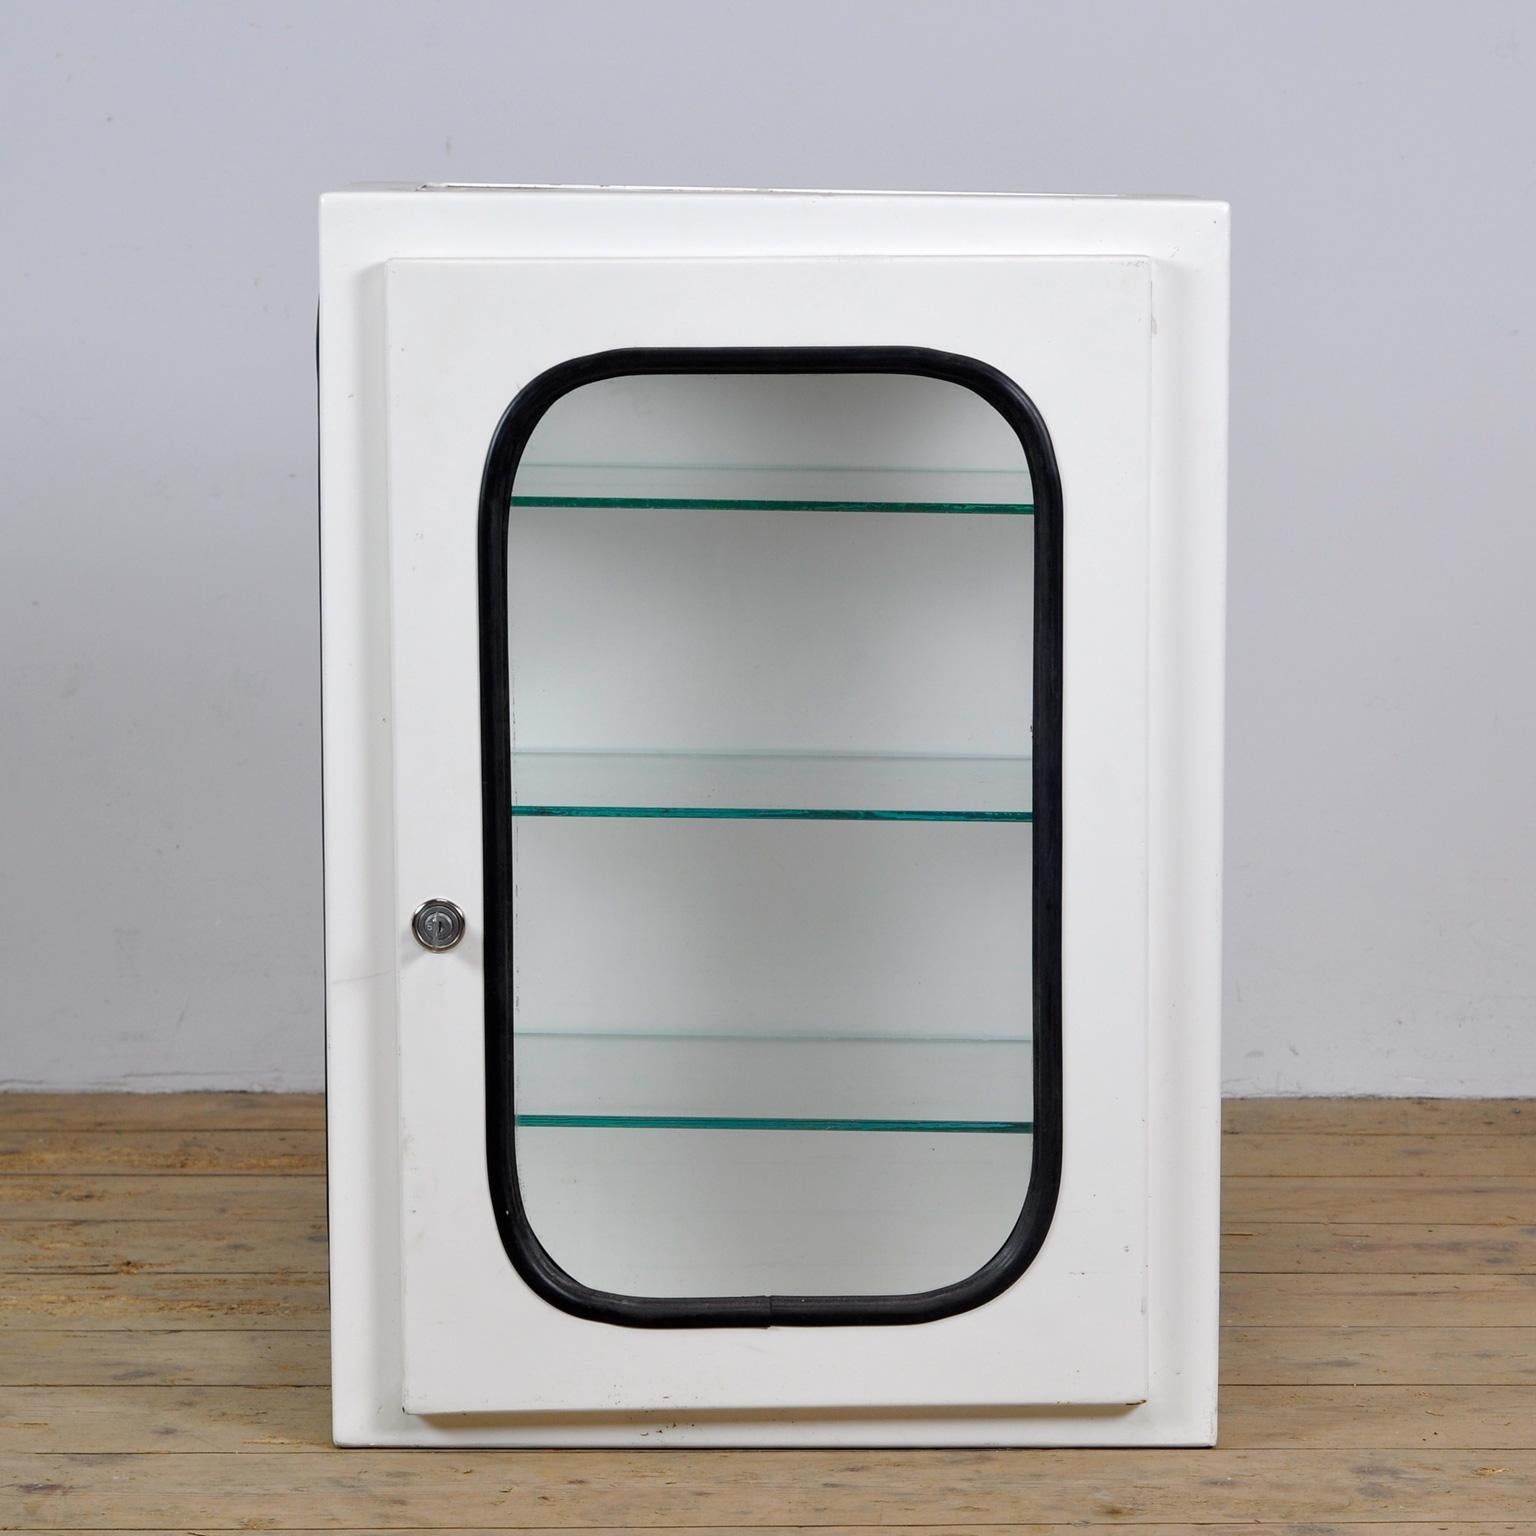 This medical cabinet was designed in the 1970s and produced circa 1975 in hungary. It was used in a hospital in budapest. It is made of iron and glass. The glass is held by a black rubber strip. The cabinet comes with three adjustable glass shelves.